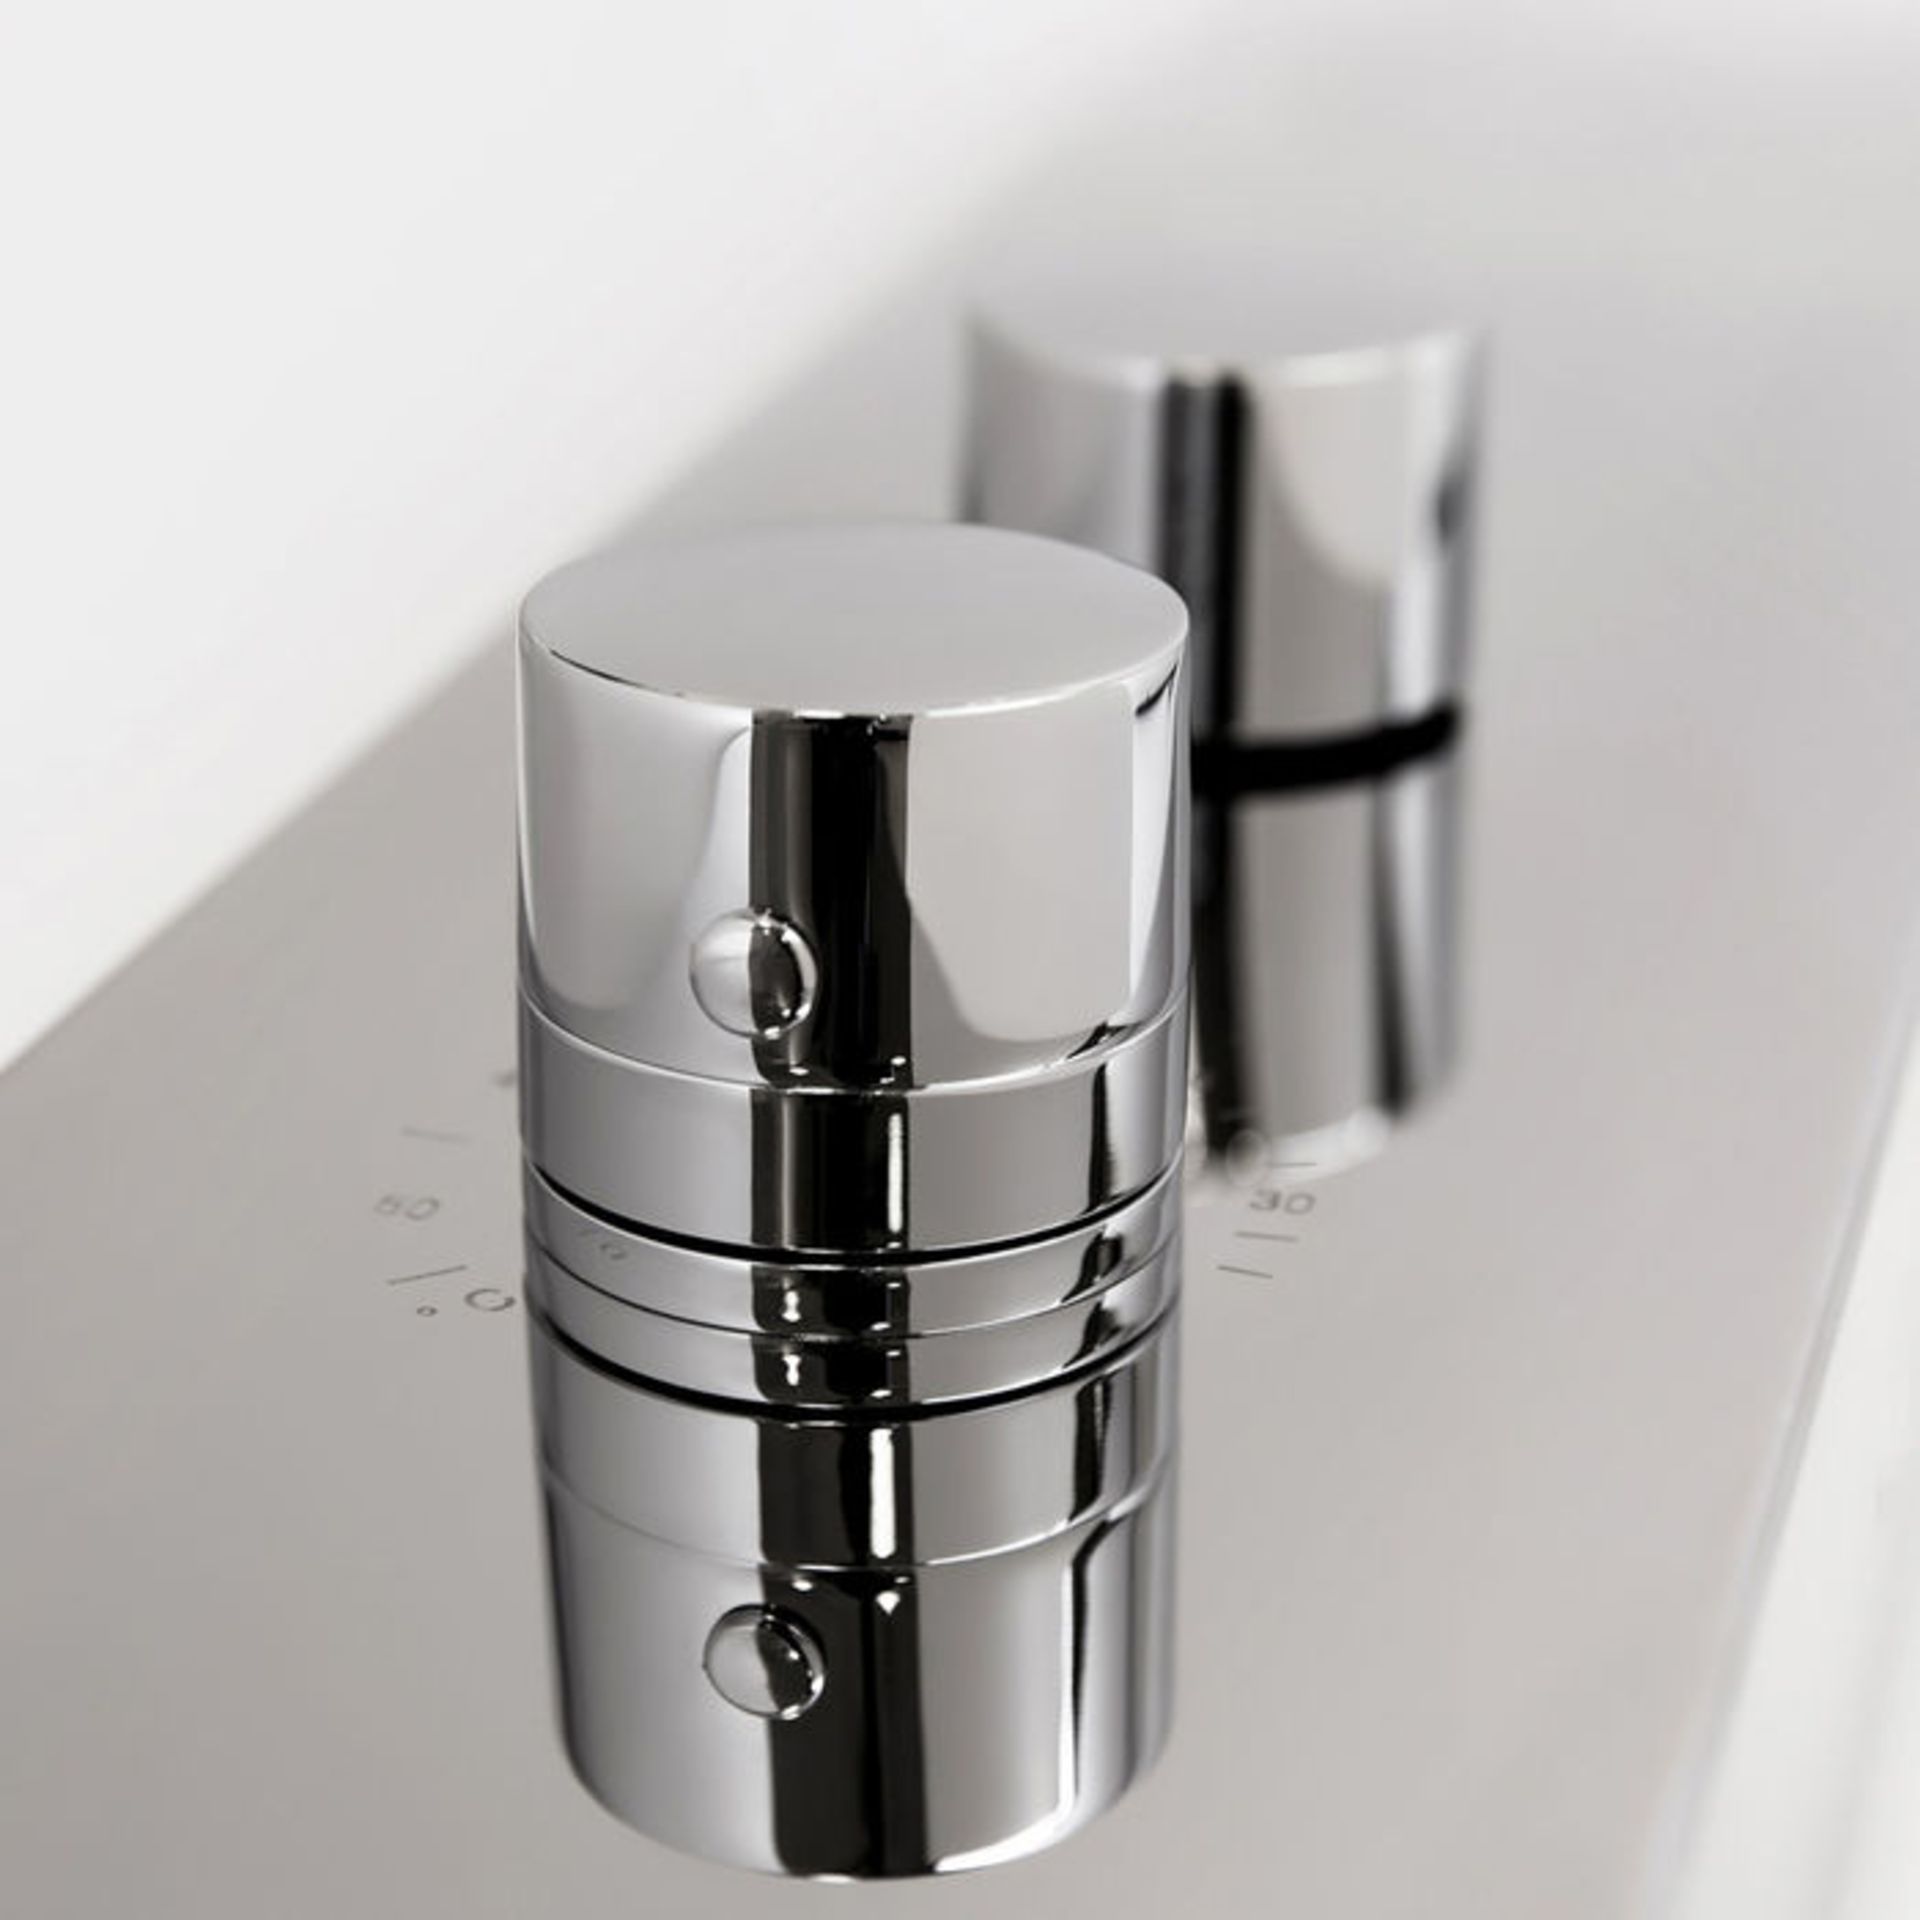 (O27) Exposed Panel Polished Chrome Shower Tower & Handheld. Feel inspired with this contemporary - Image 3 of 3